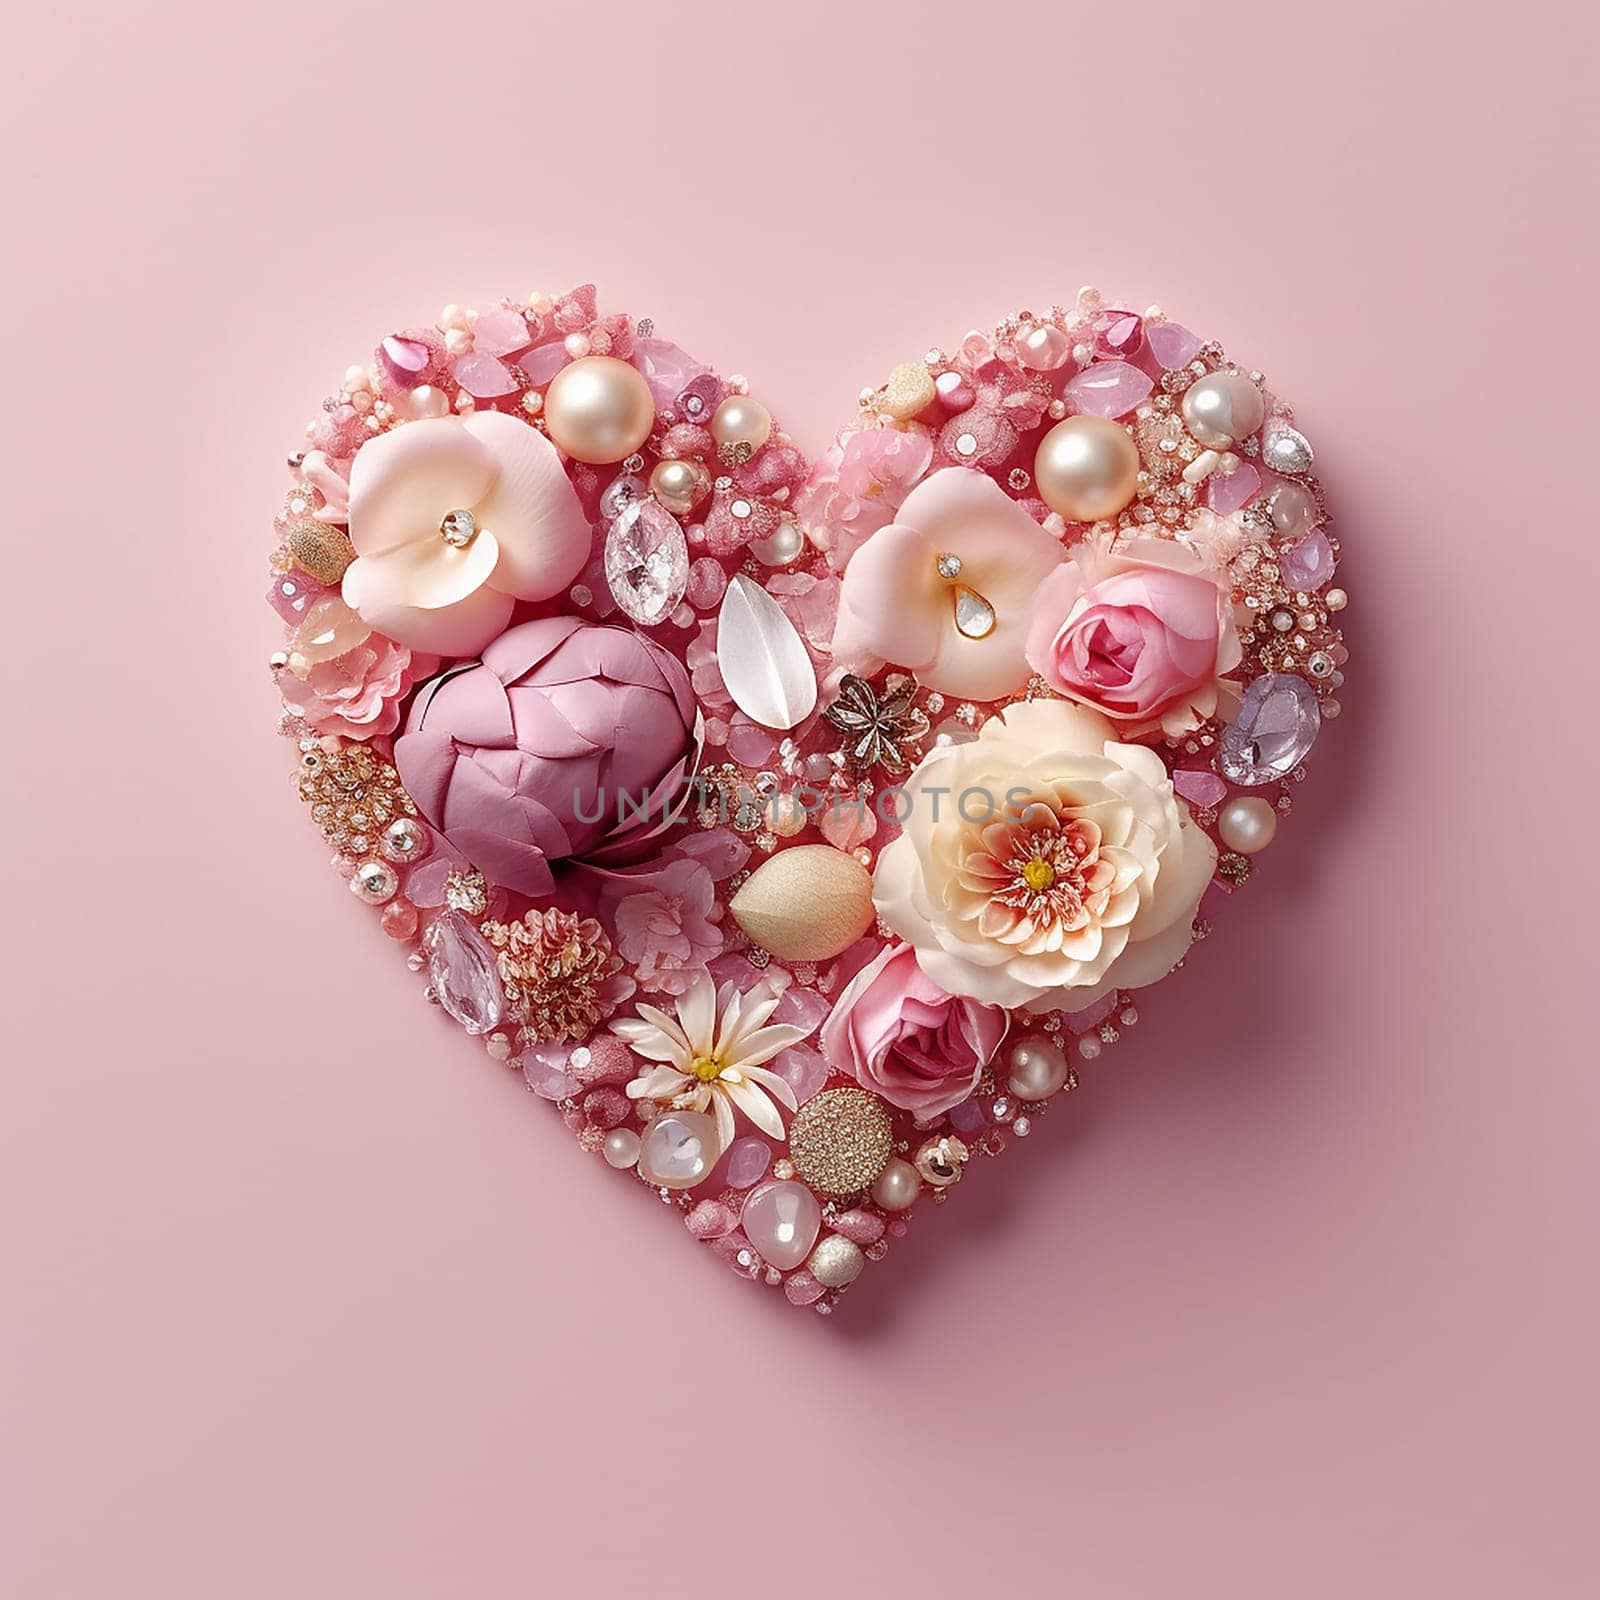 Ornate heart comprised of flowers, jewels, and beads on pink background. by Hype2art